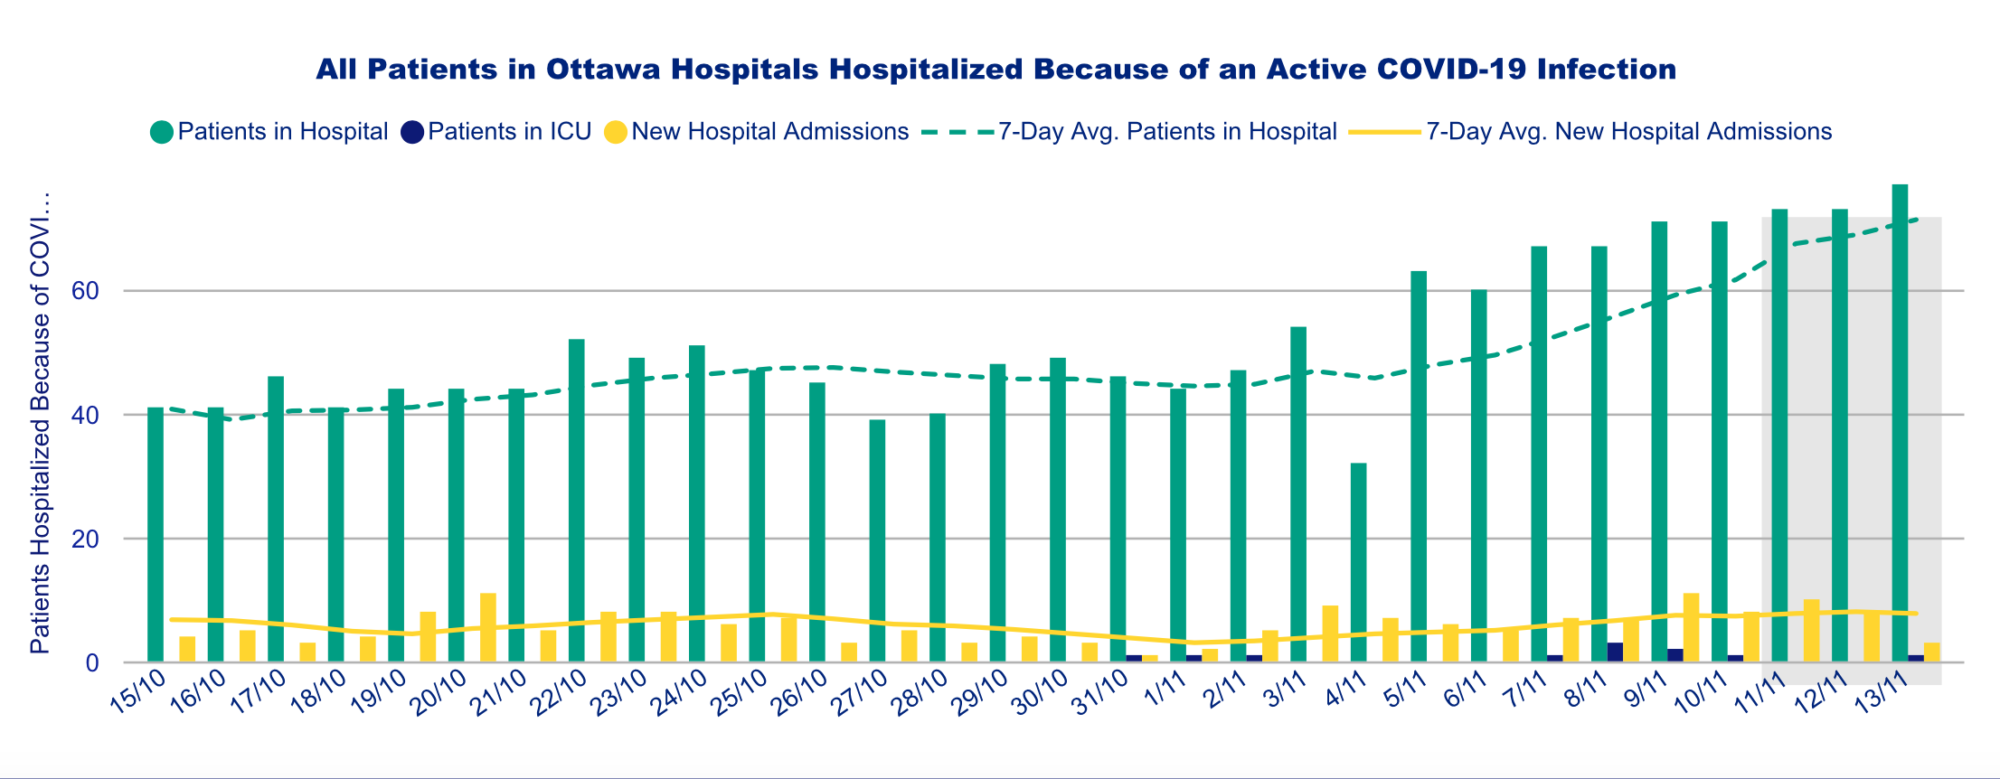 Chart of all patients in Ottawa hospitals hospitalized because of an active COVID-19 infection.